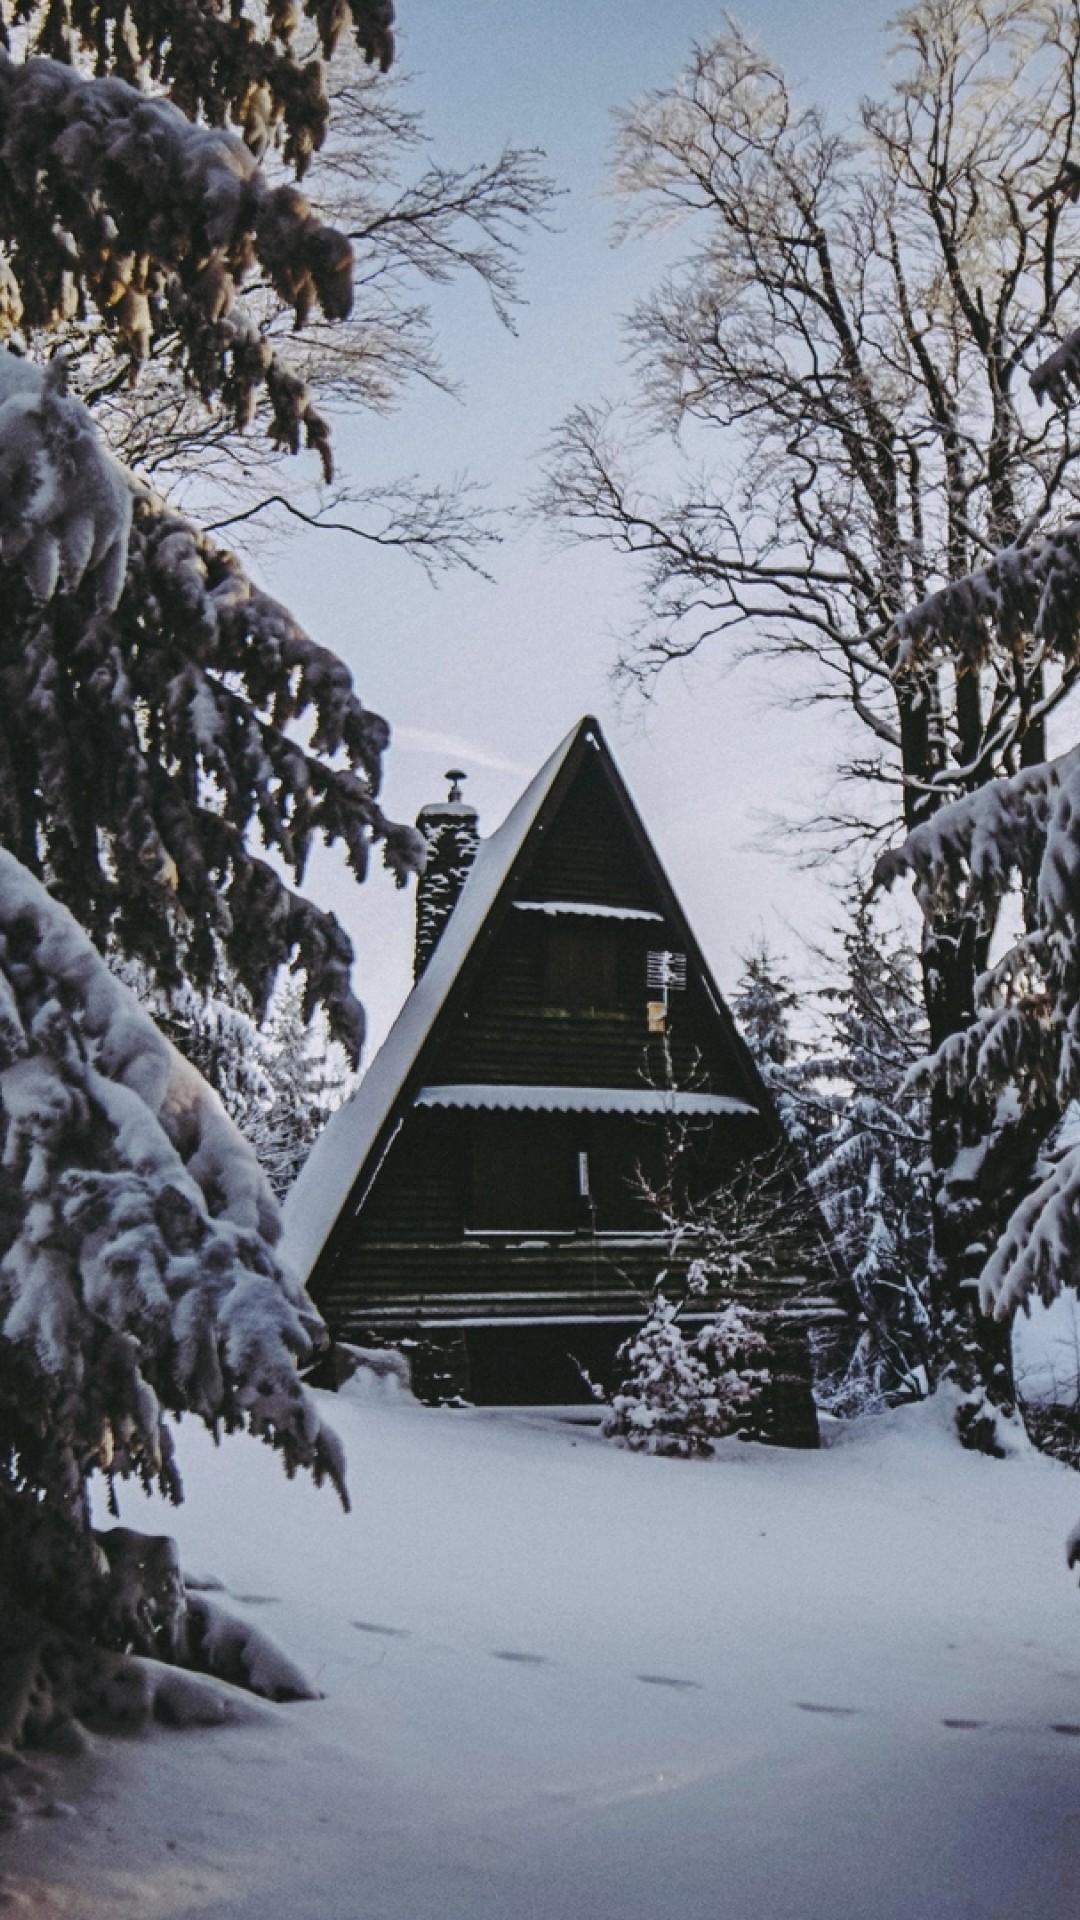 House in the middle of a snowy forest HD Wallpaper iPhone 6